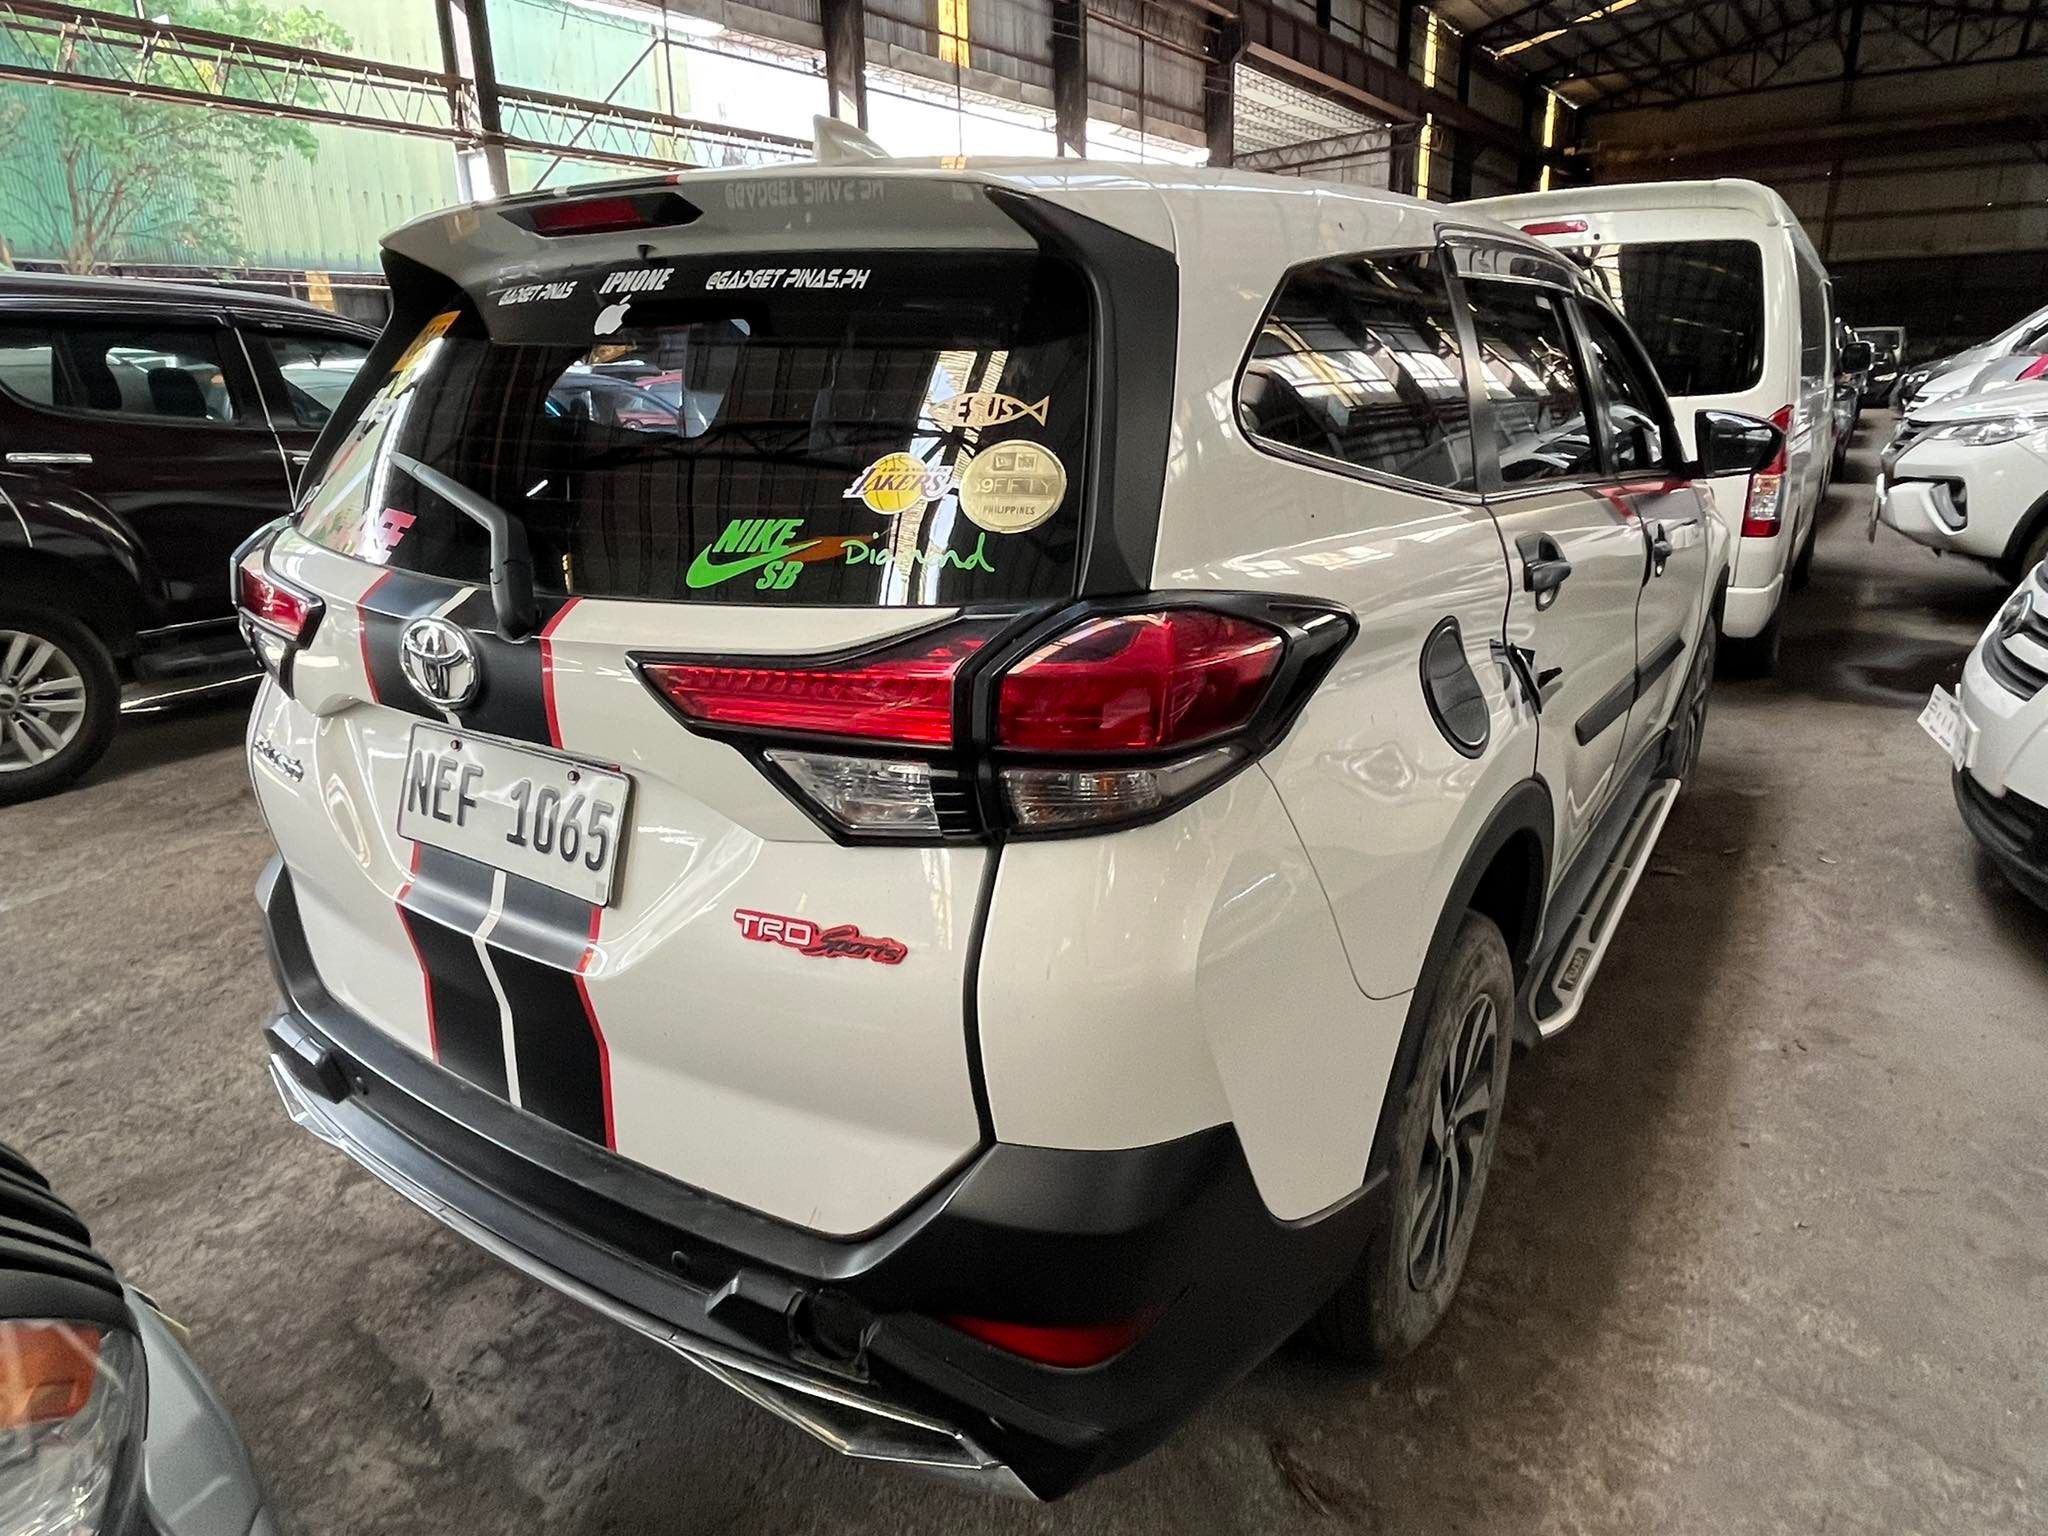 Old 2019 Toyota Rush 1.5 E AT